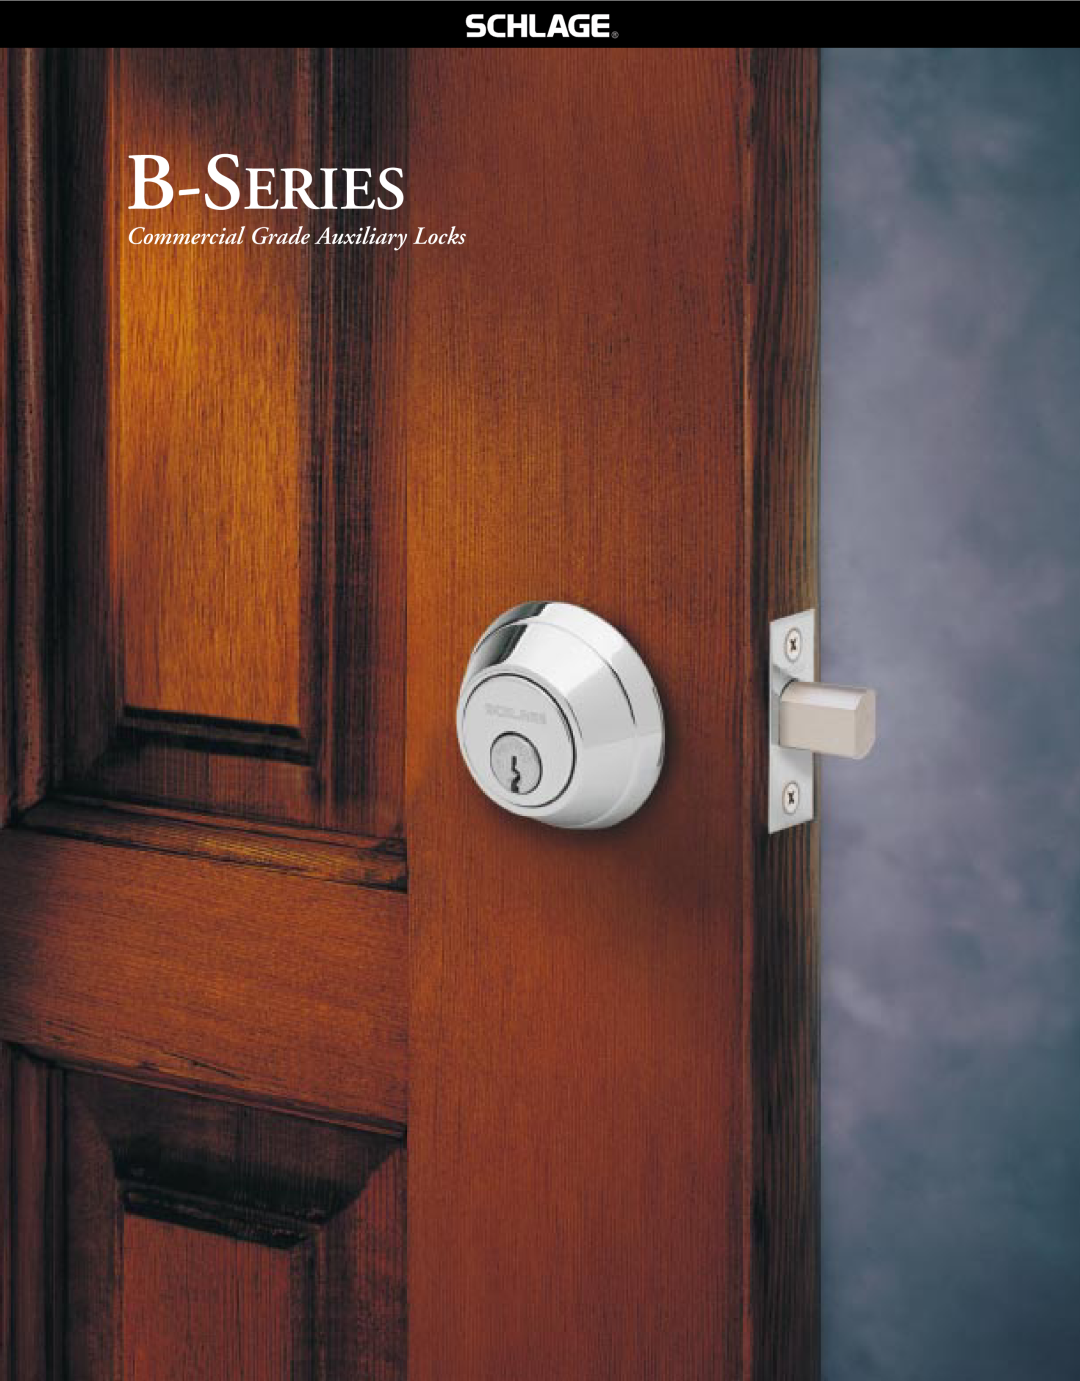 Schlage B-Series manual Commercial Grade Auxiliary Locks 